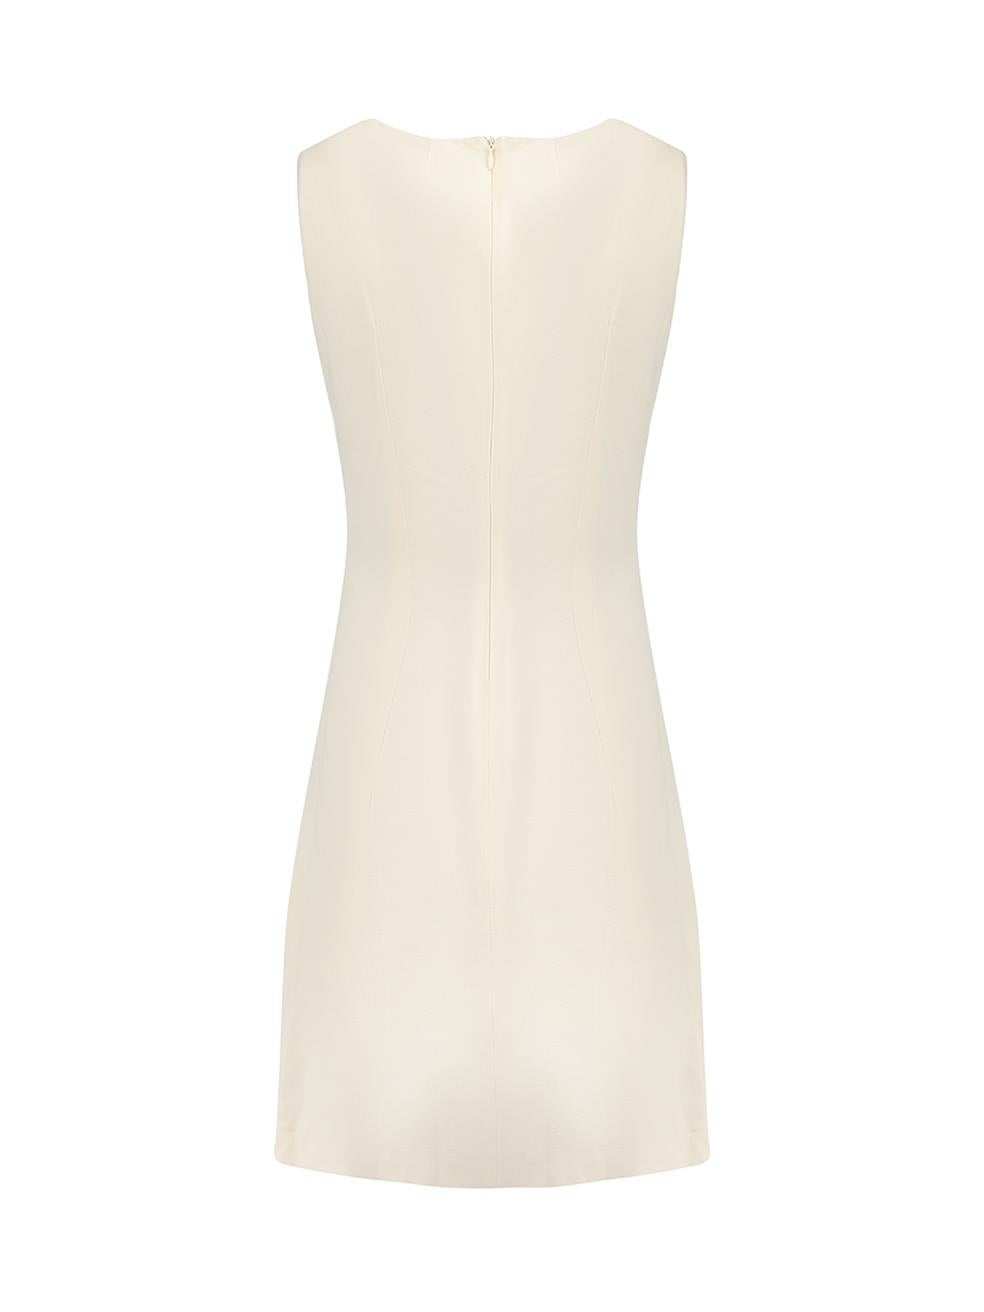 CONDITION is Very good. Minimal wear to dress is evident. Minimal discoloured marks to back of dress on this used RED Valentino designer resale item.

Details
Ecru
Viscose
Bodycon dress
Figure hugging fit
Sleeveless
Knee length
Round neckline
Front